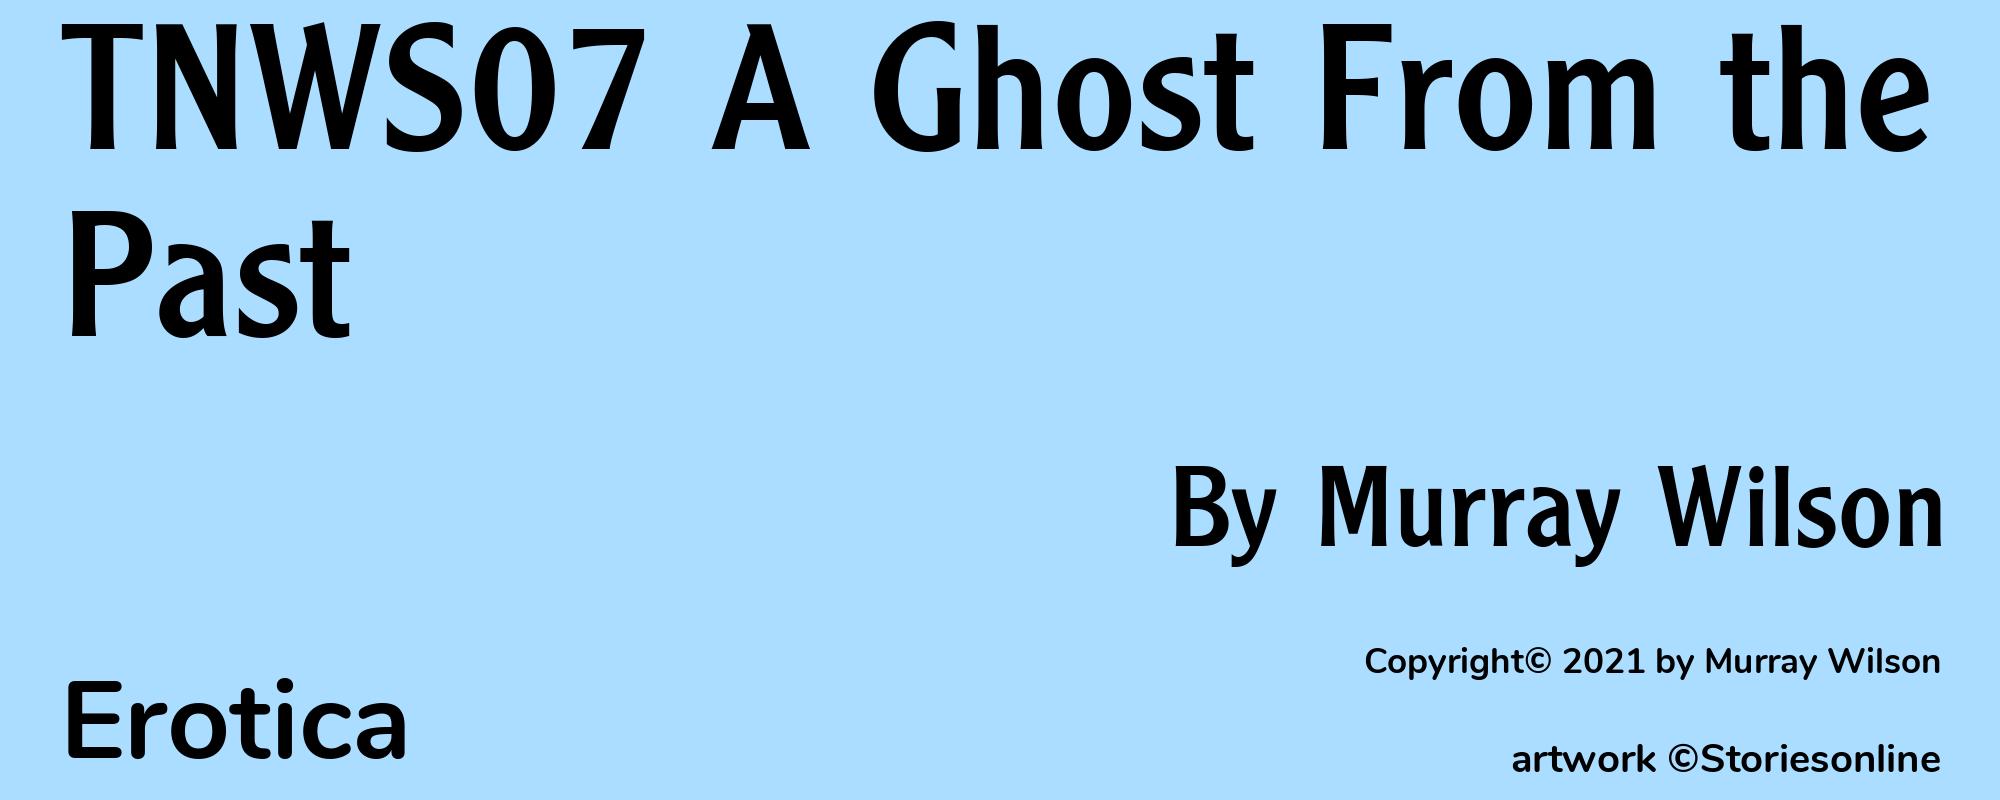 TNWS07 A Ghost From the Past - Cover